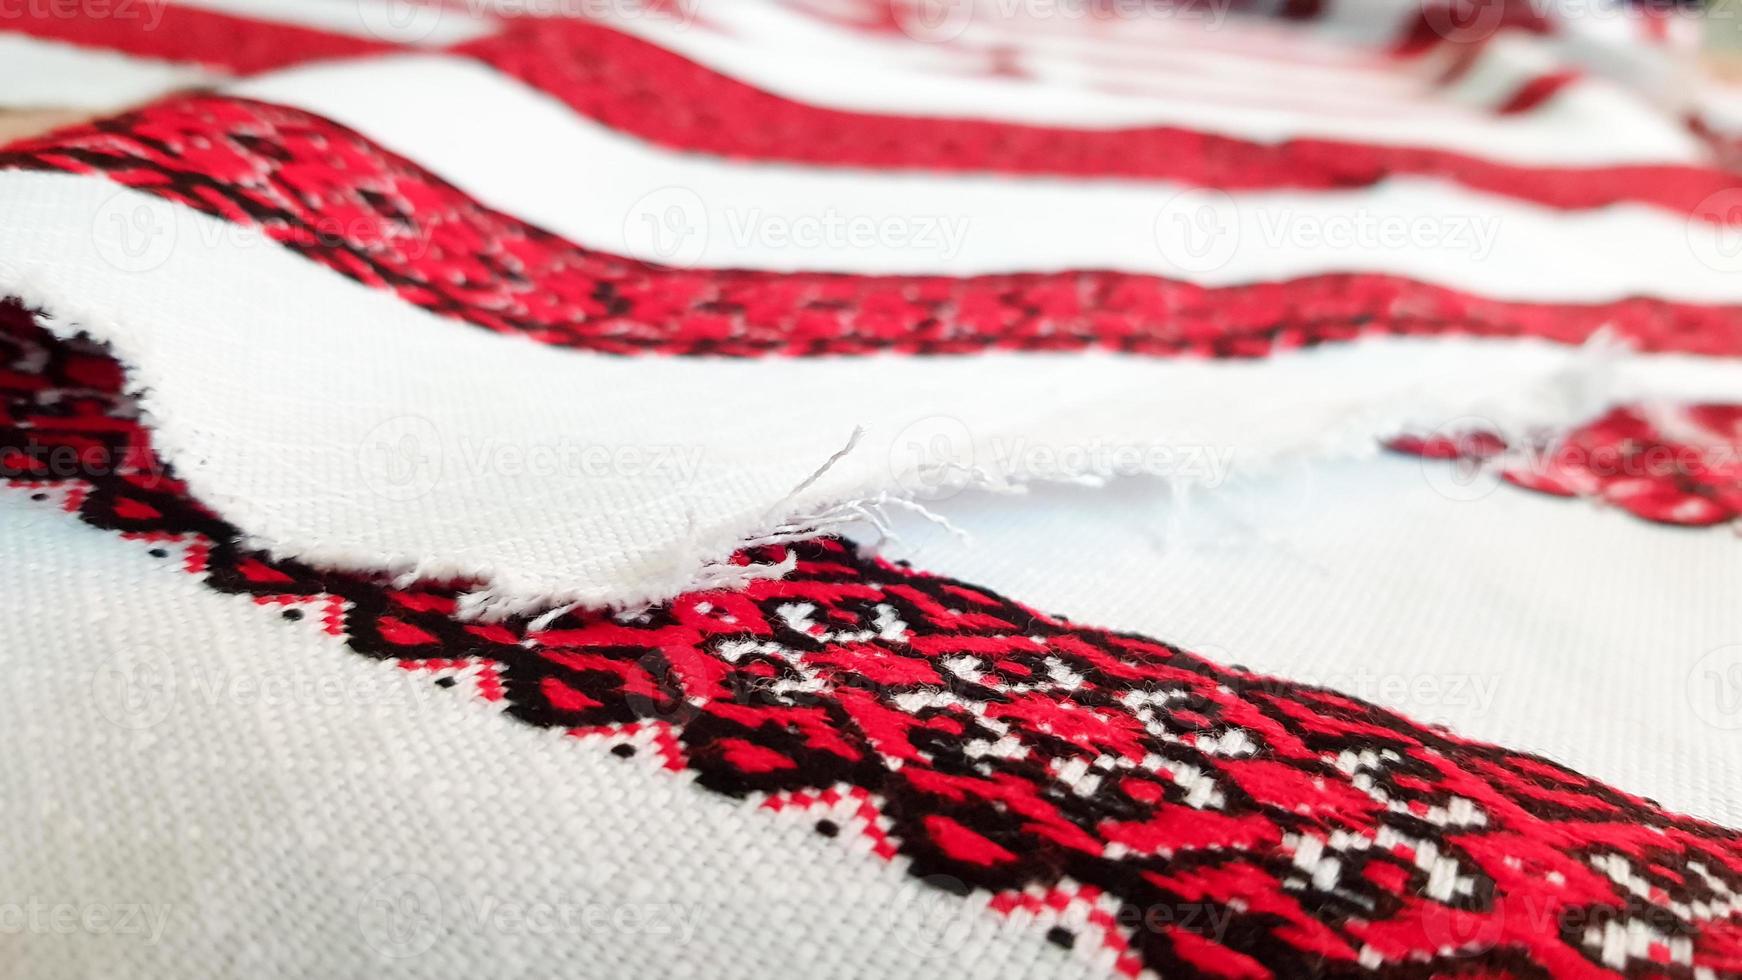 Ukrainian folk hand embroidery. Embroidered ornament with red-black threads on white fabric. Embroidered ornament in black and red thread. Ethnic Ukrainian folk embroidery on white fabric. photo